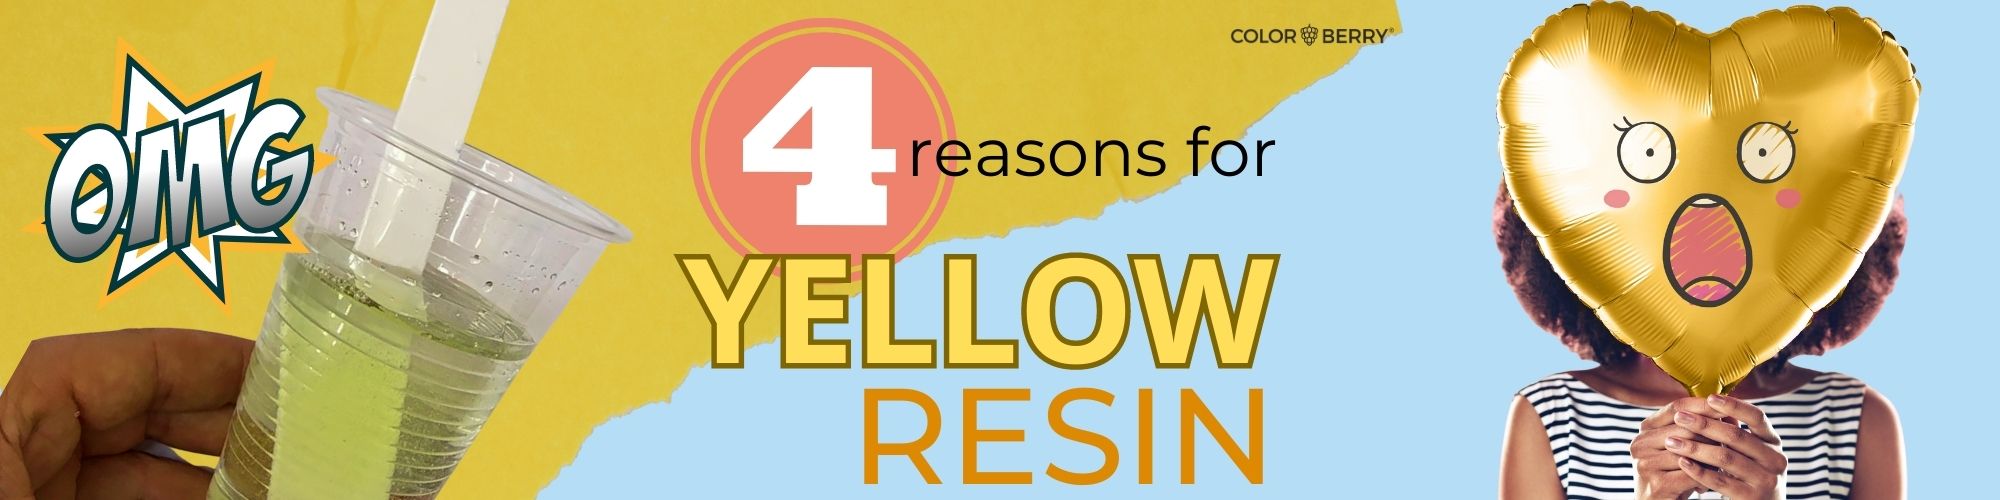 WHY RESIN TURNS YELLOW? Is there a solution for it?